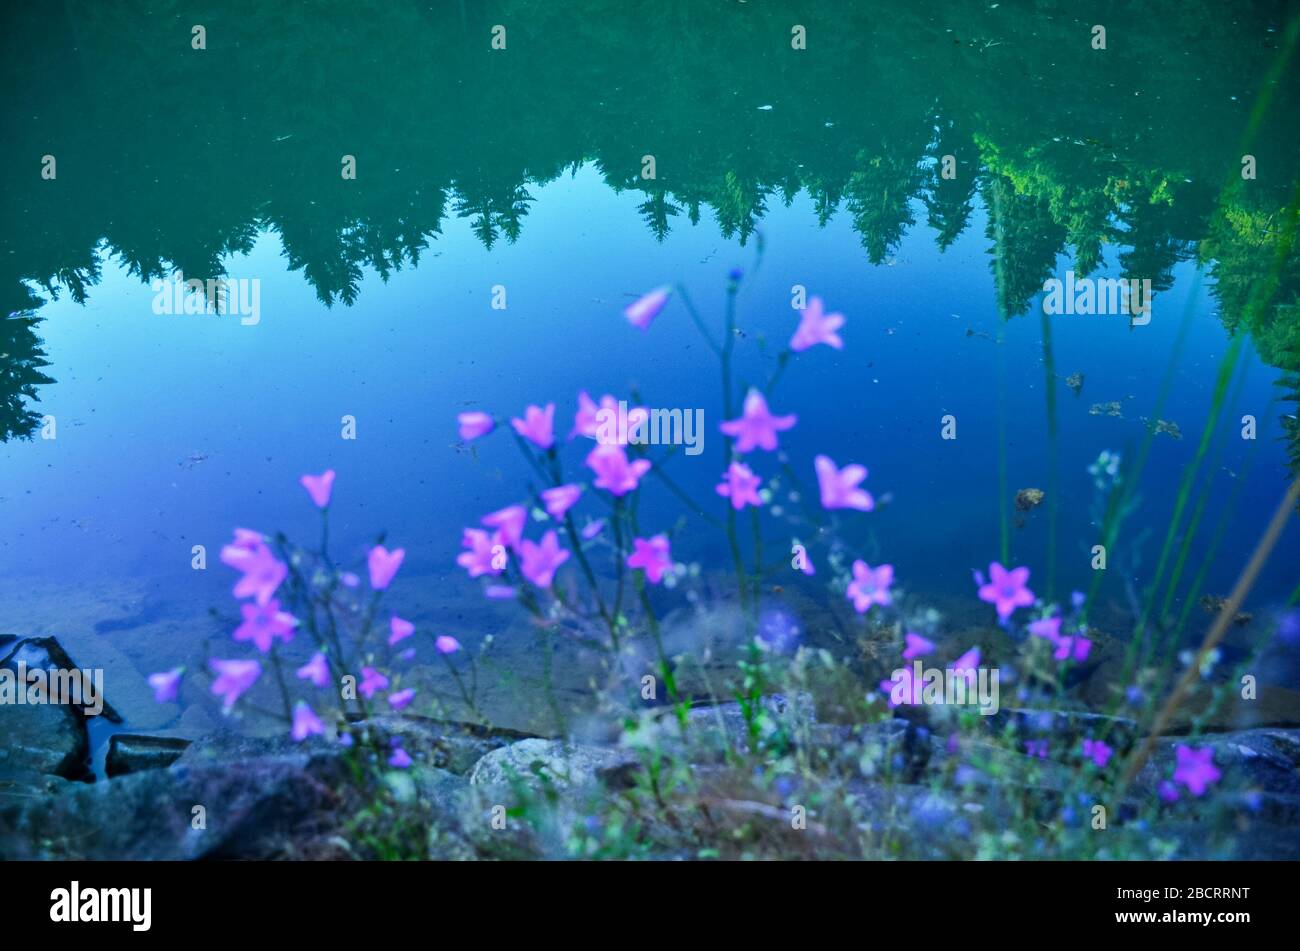 Campanula lila flowers near by lake in mountains. nature photo with copy space Stock Photo